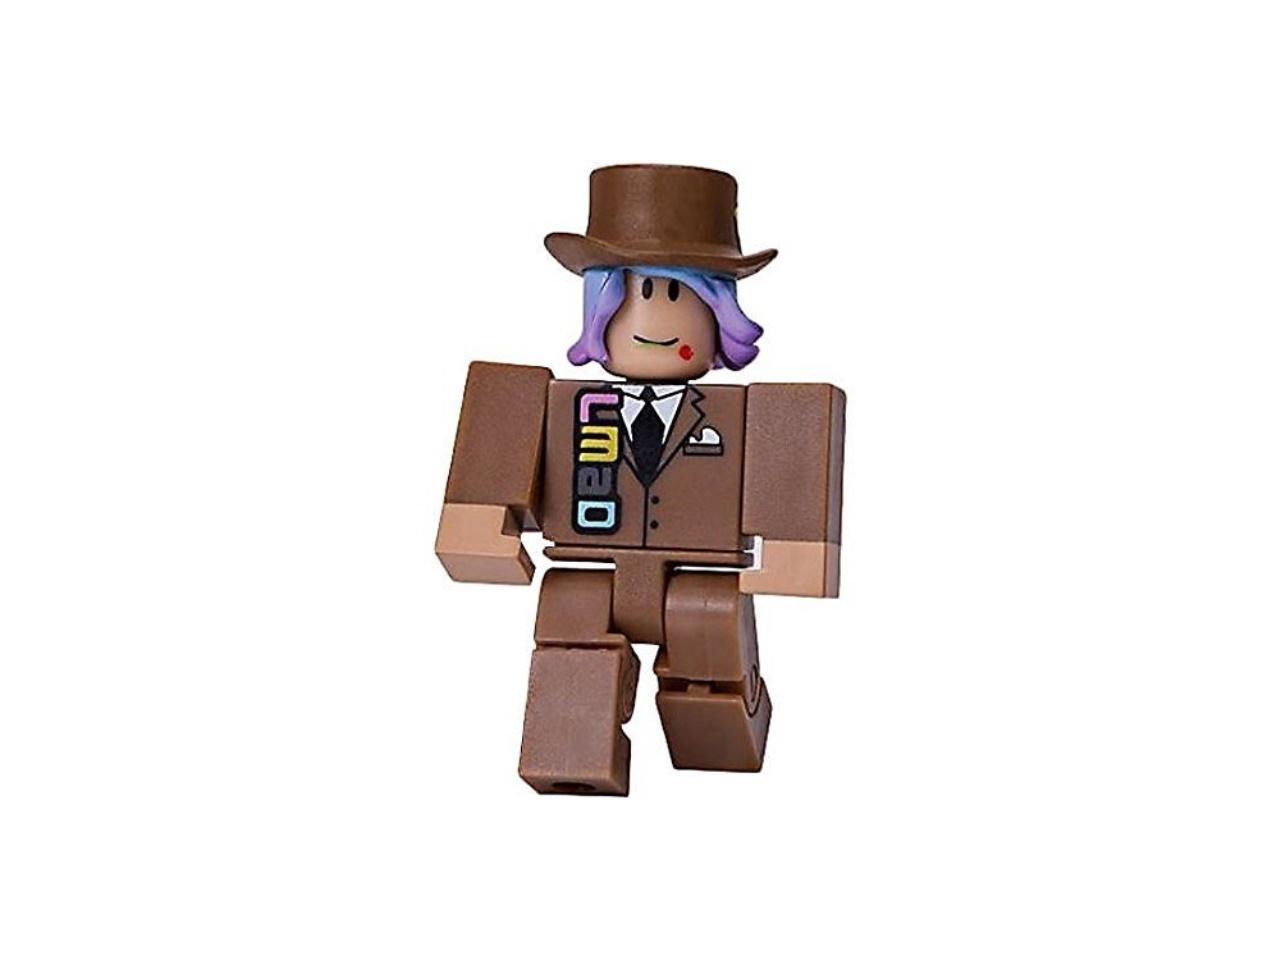 Roblox Series 1 Let S Make A Deal Action Figure Mystery Box Virtual Item Code 2 5 Newegg Com - lets do codes roblox